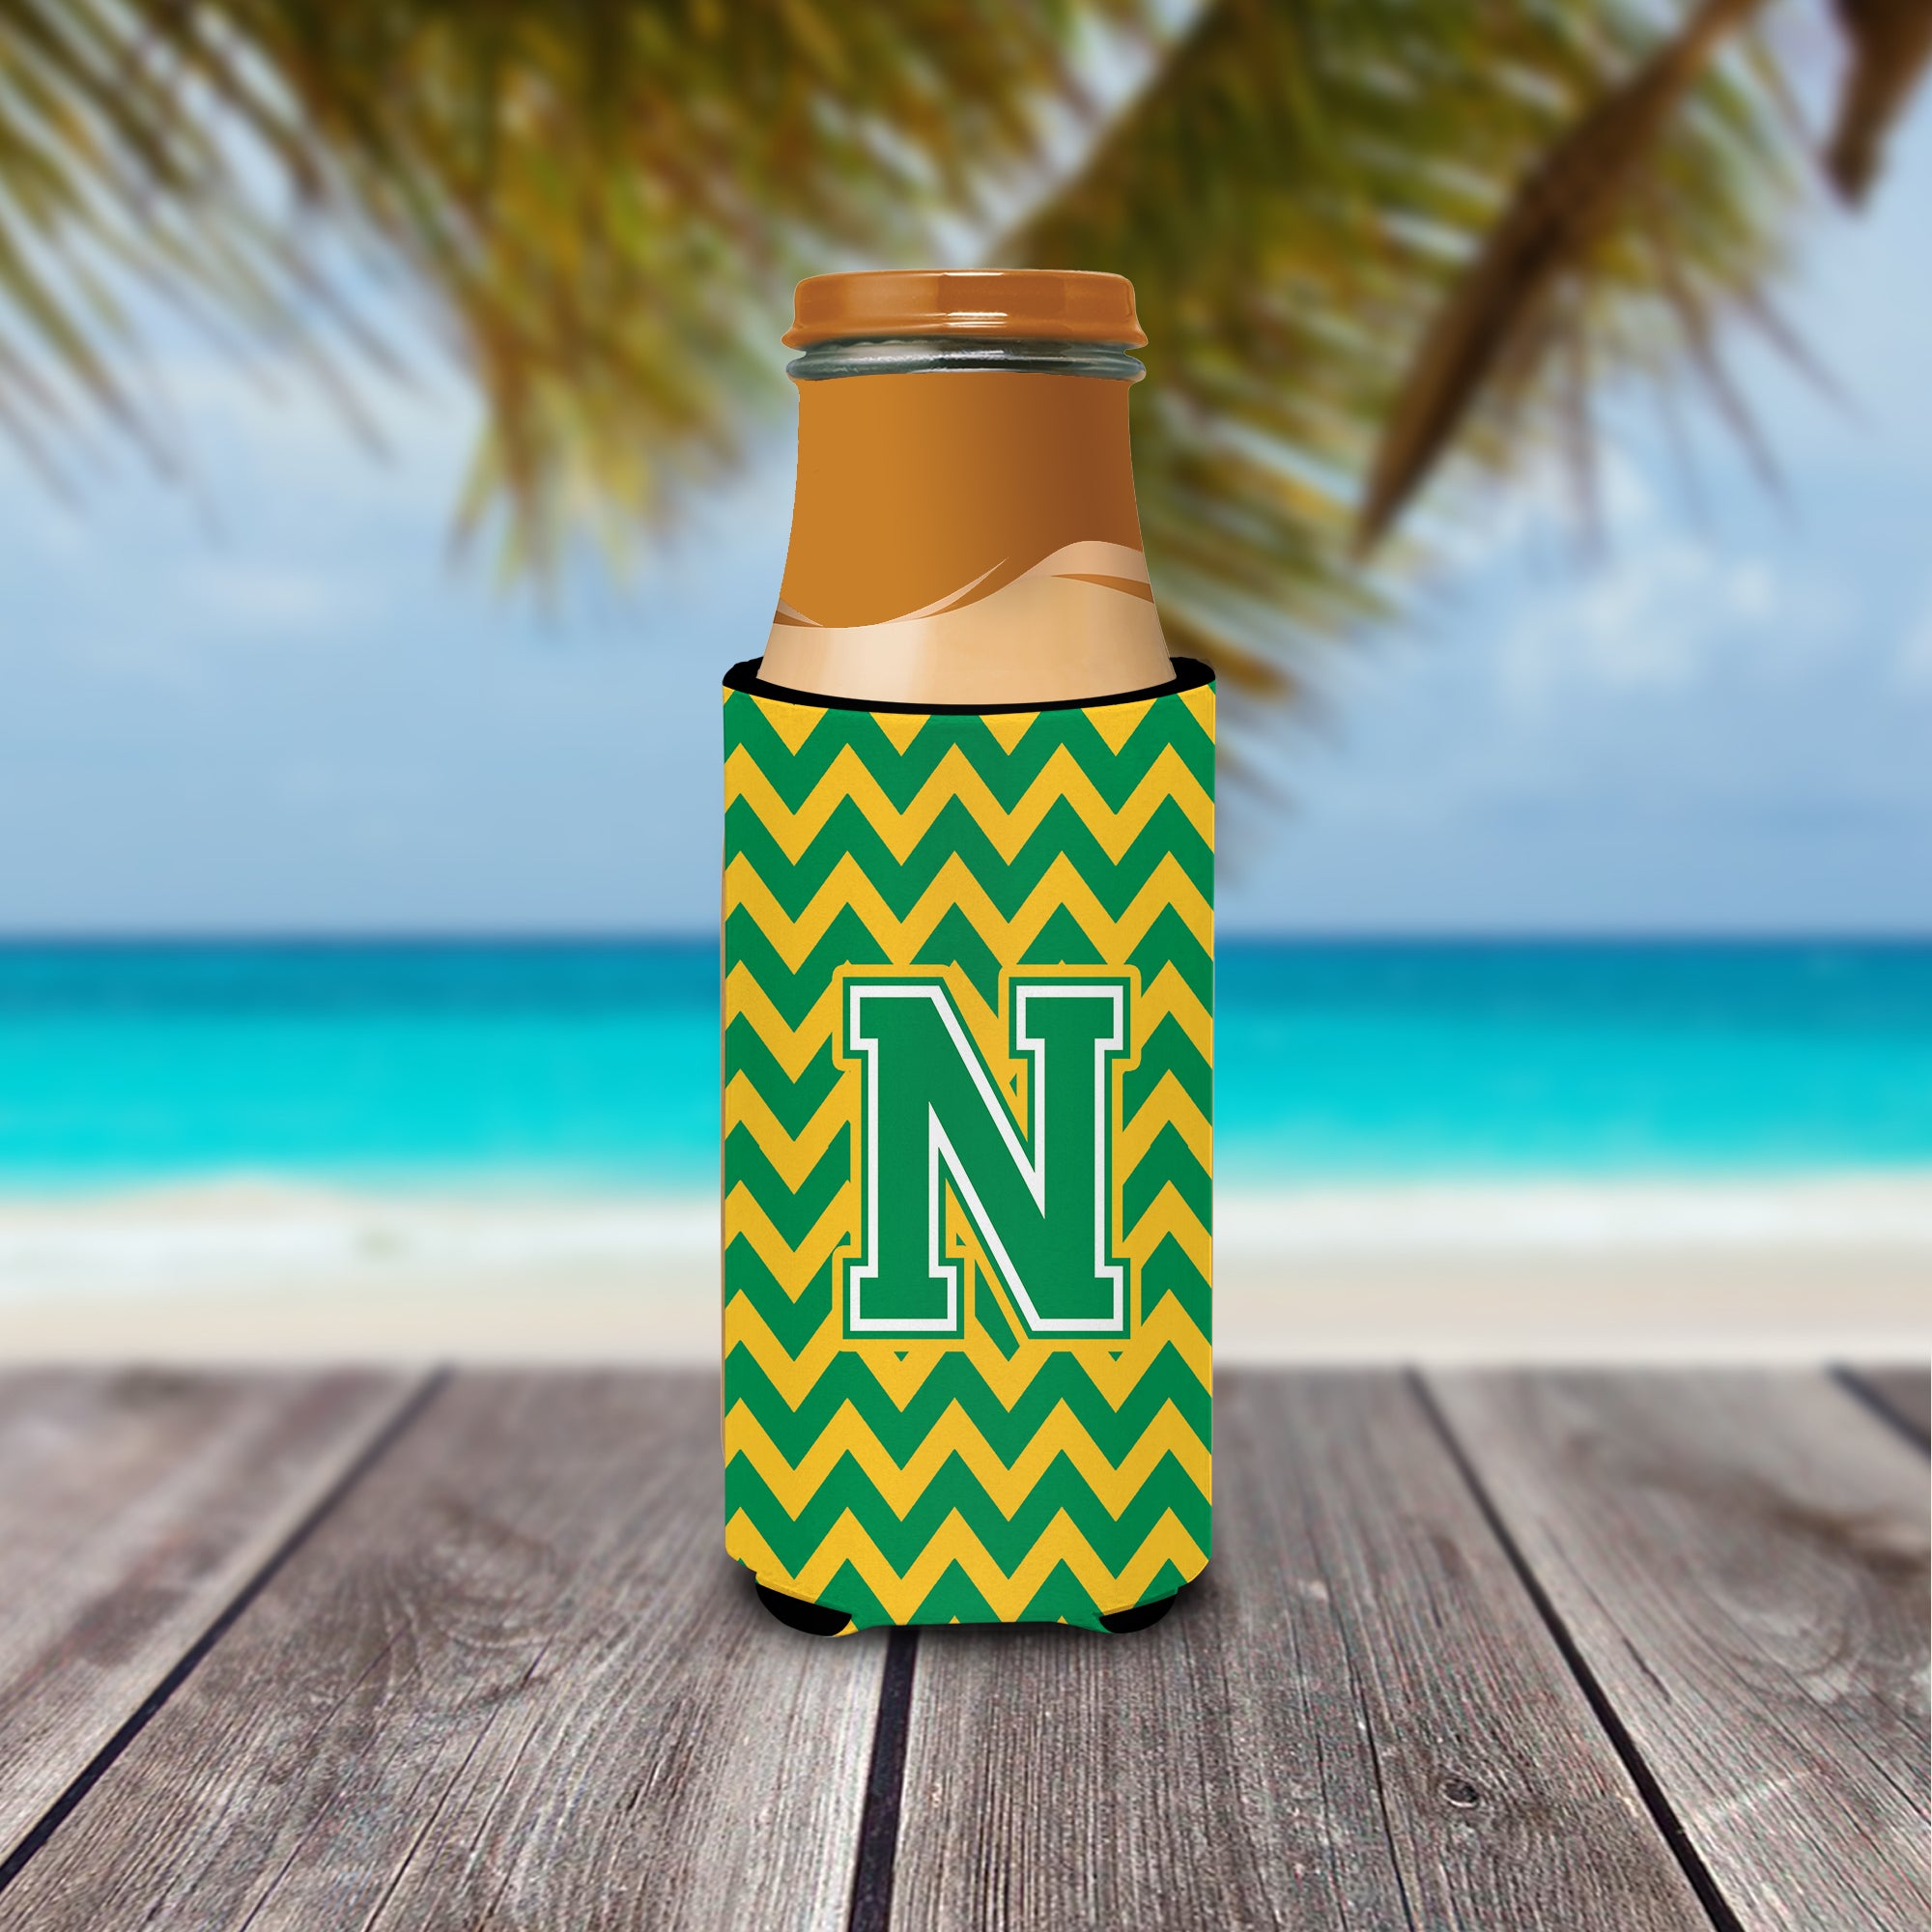 Letter N Chevron Green and Gold Ultra Beverage Insulators for slim cans CJ1059-NMUK